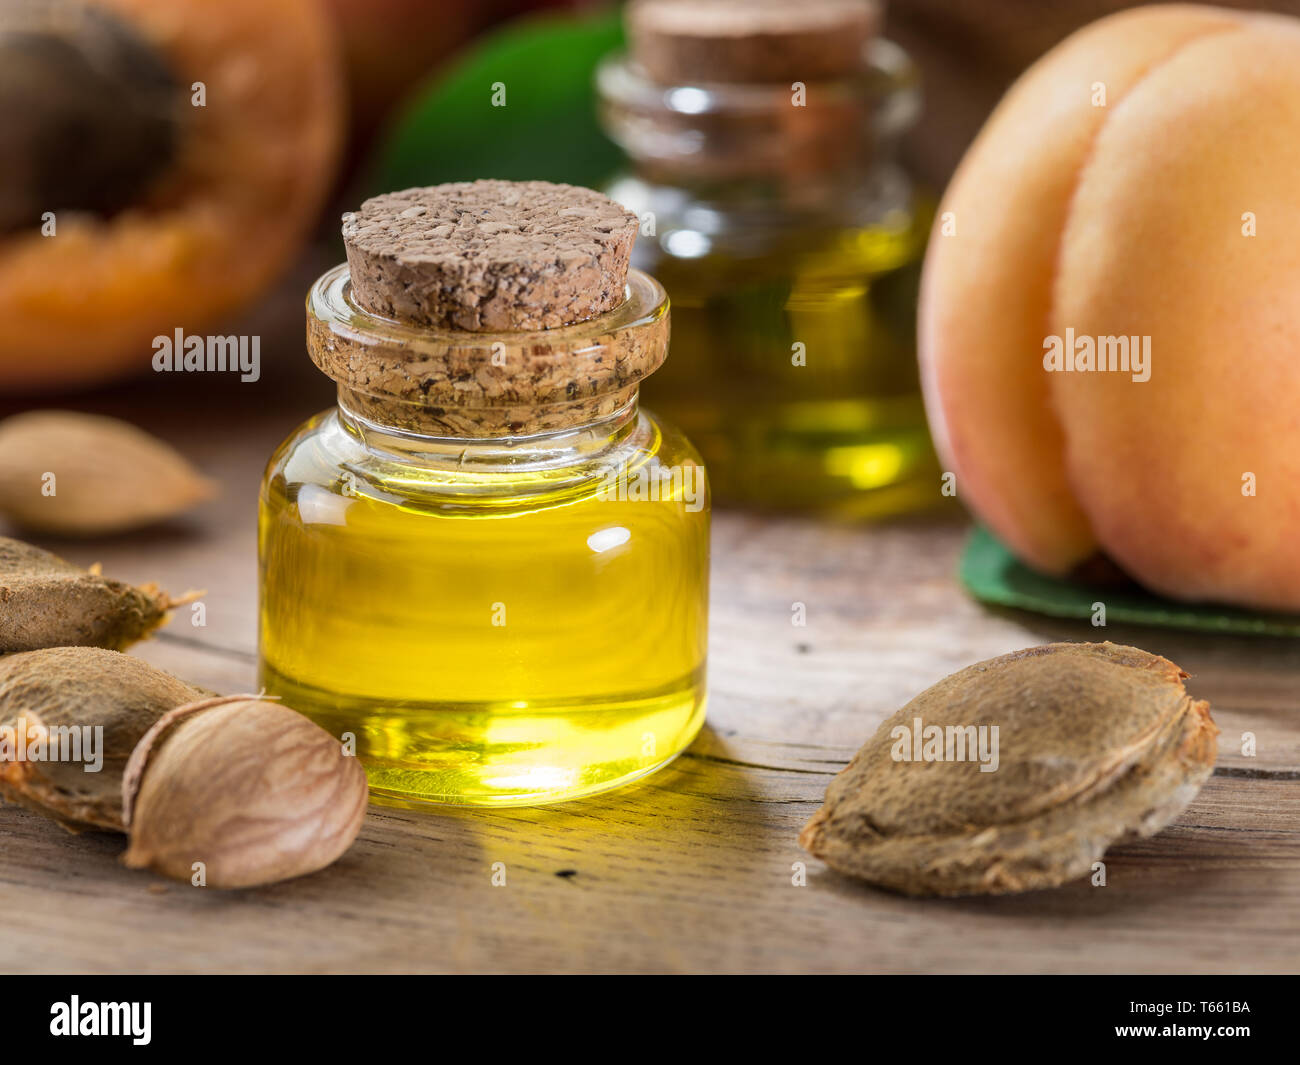 Apricot kernel oil and apricot kernels on wooden background. Stock Photo by  ©Valentyn_Volkov 274249384